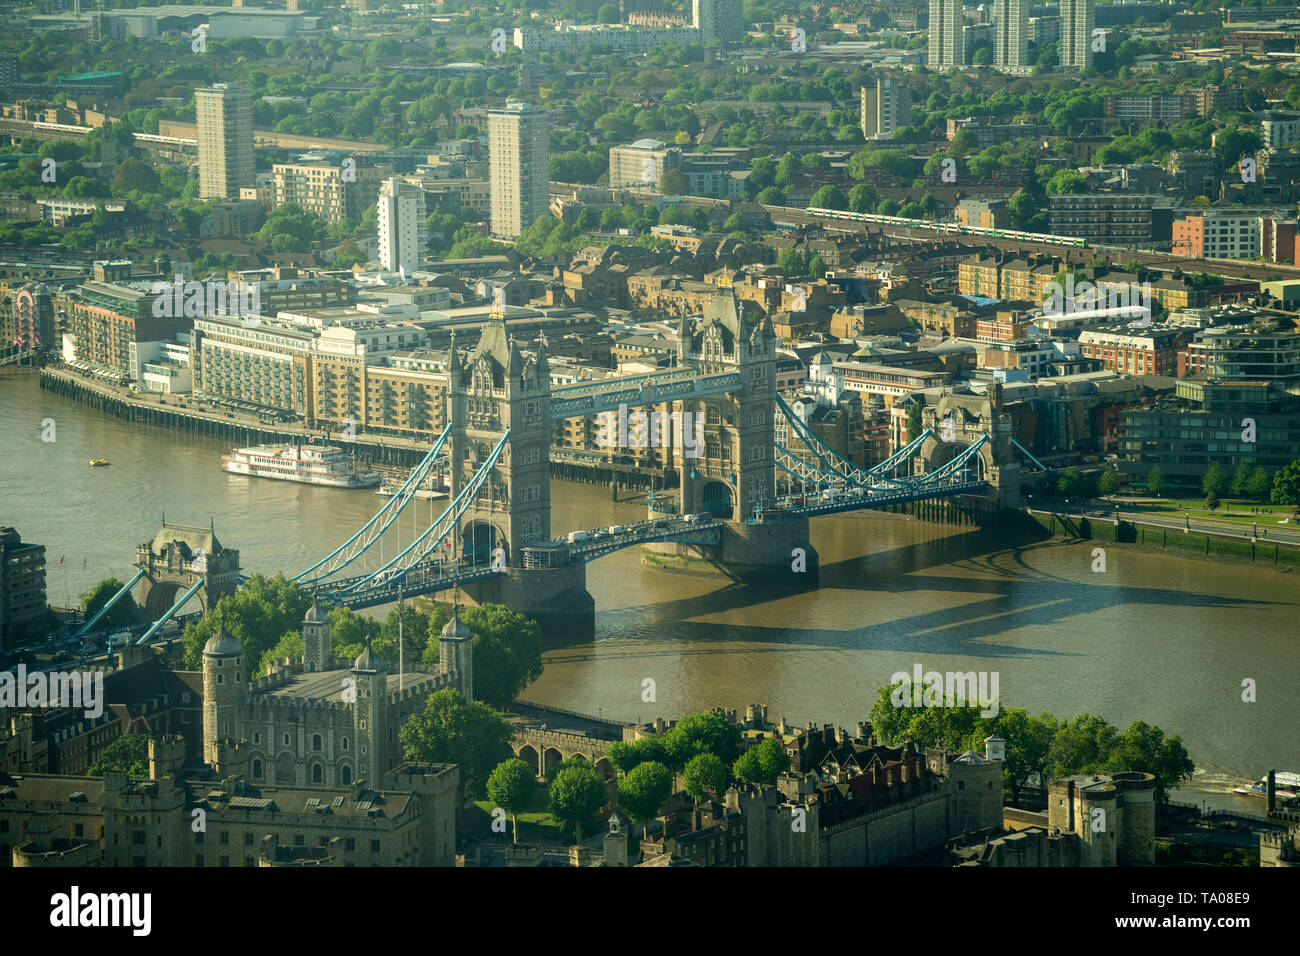 Views of Tower Bridge as seen from Searcys on the top floor of the Gherkin building in London. Photo date: Tuesday, May 21, 2019. Photo: Roger Garfiel Stock Photo